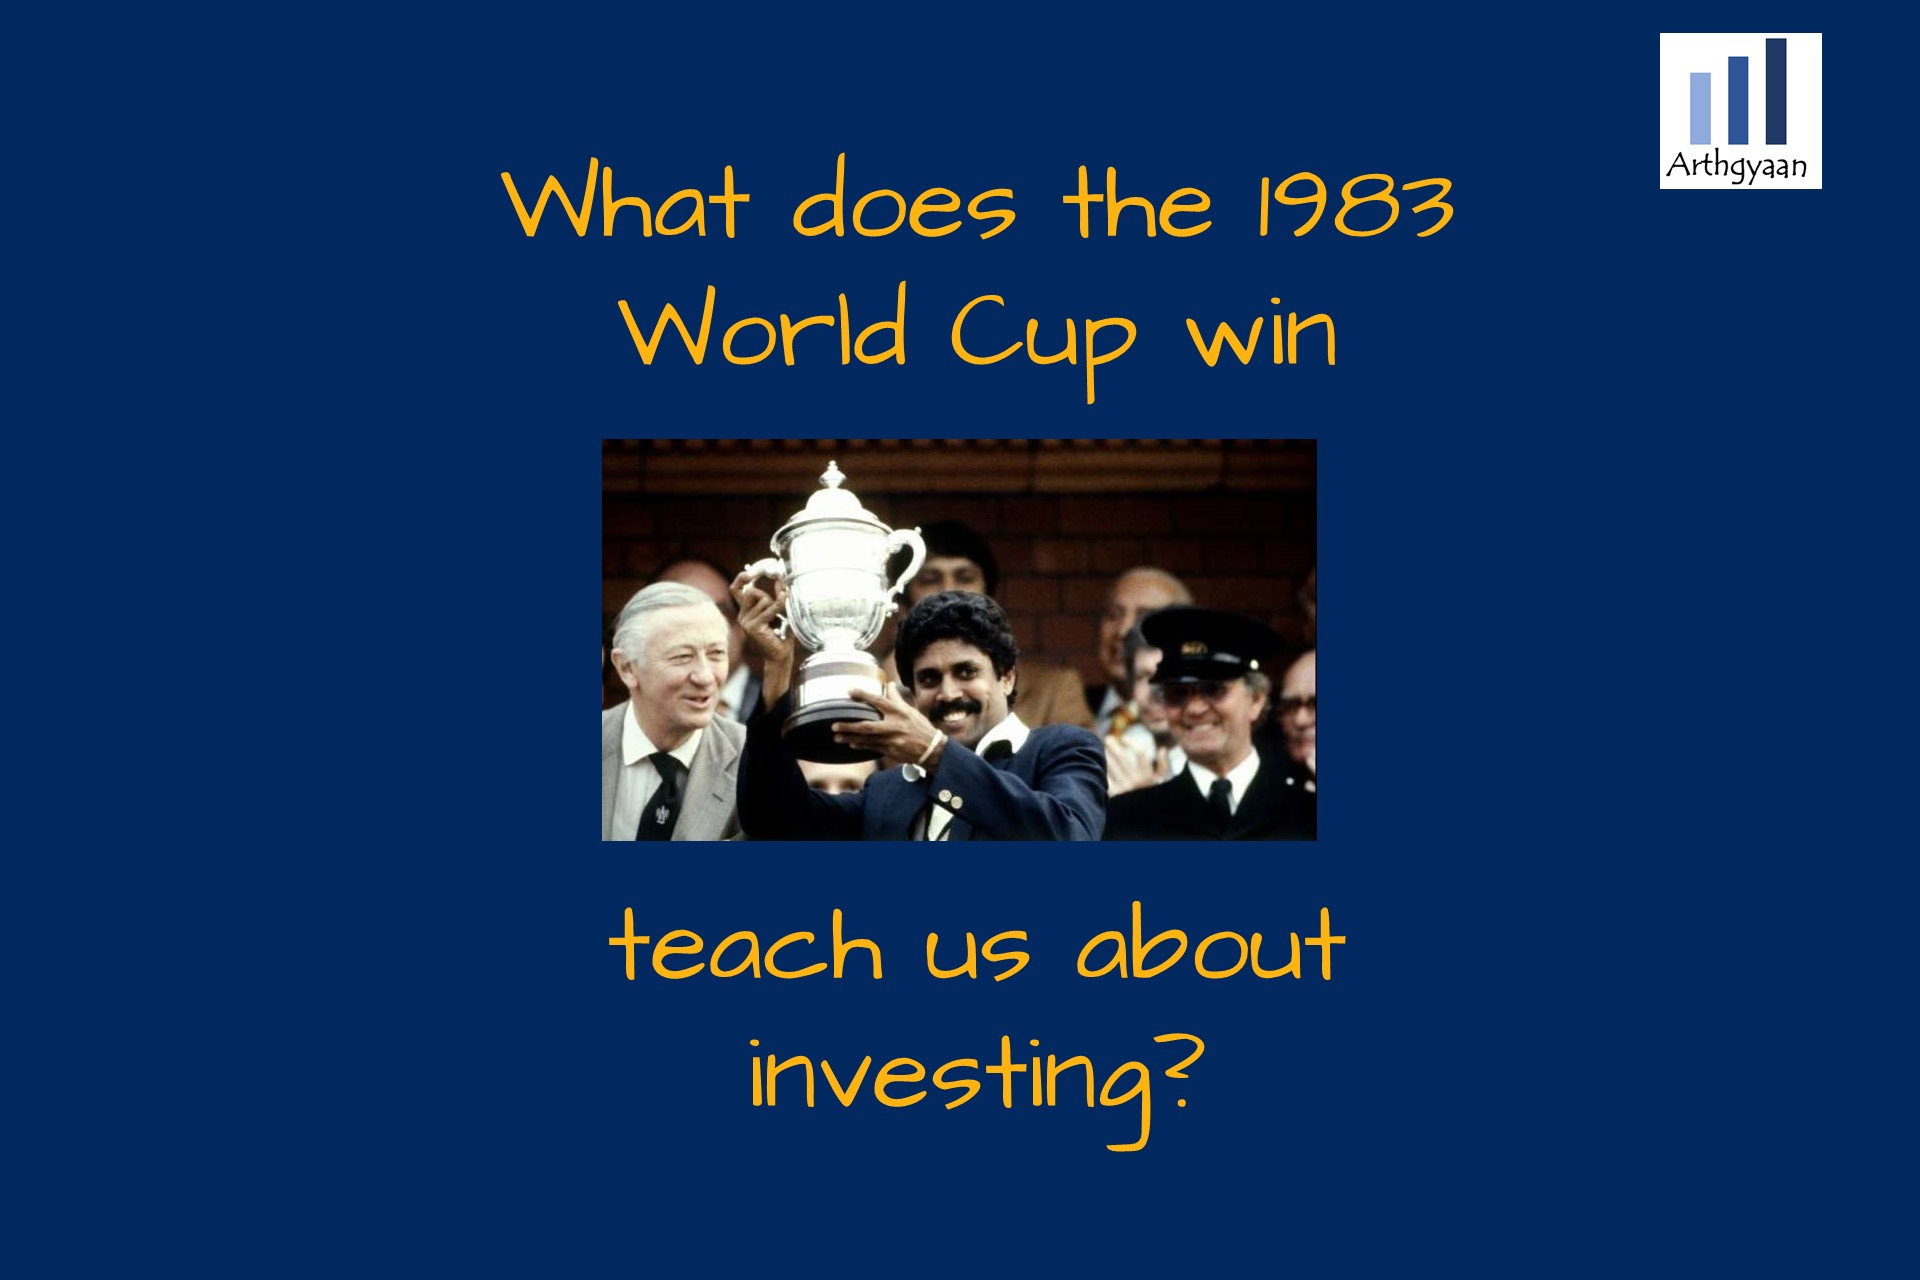 What does the 1983 World Cup win teach us about investing?